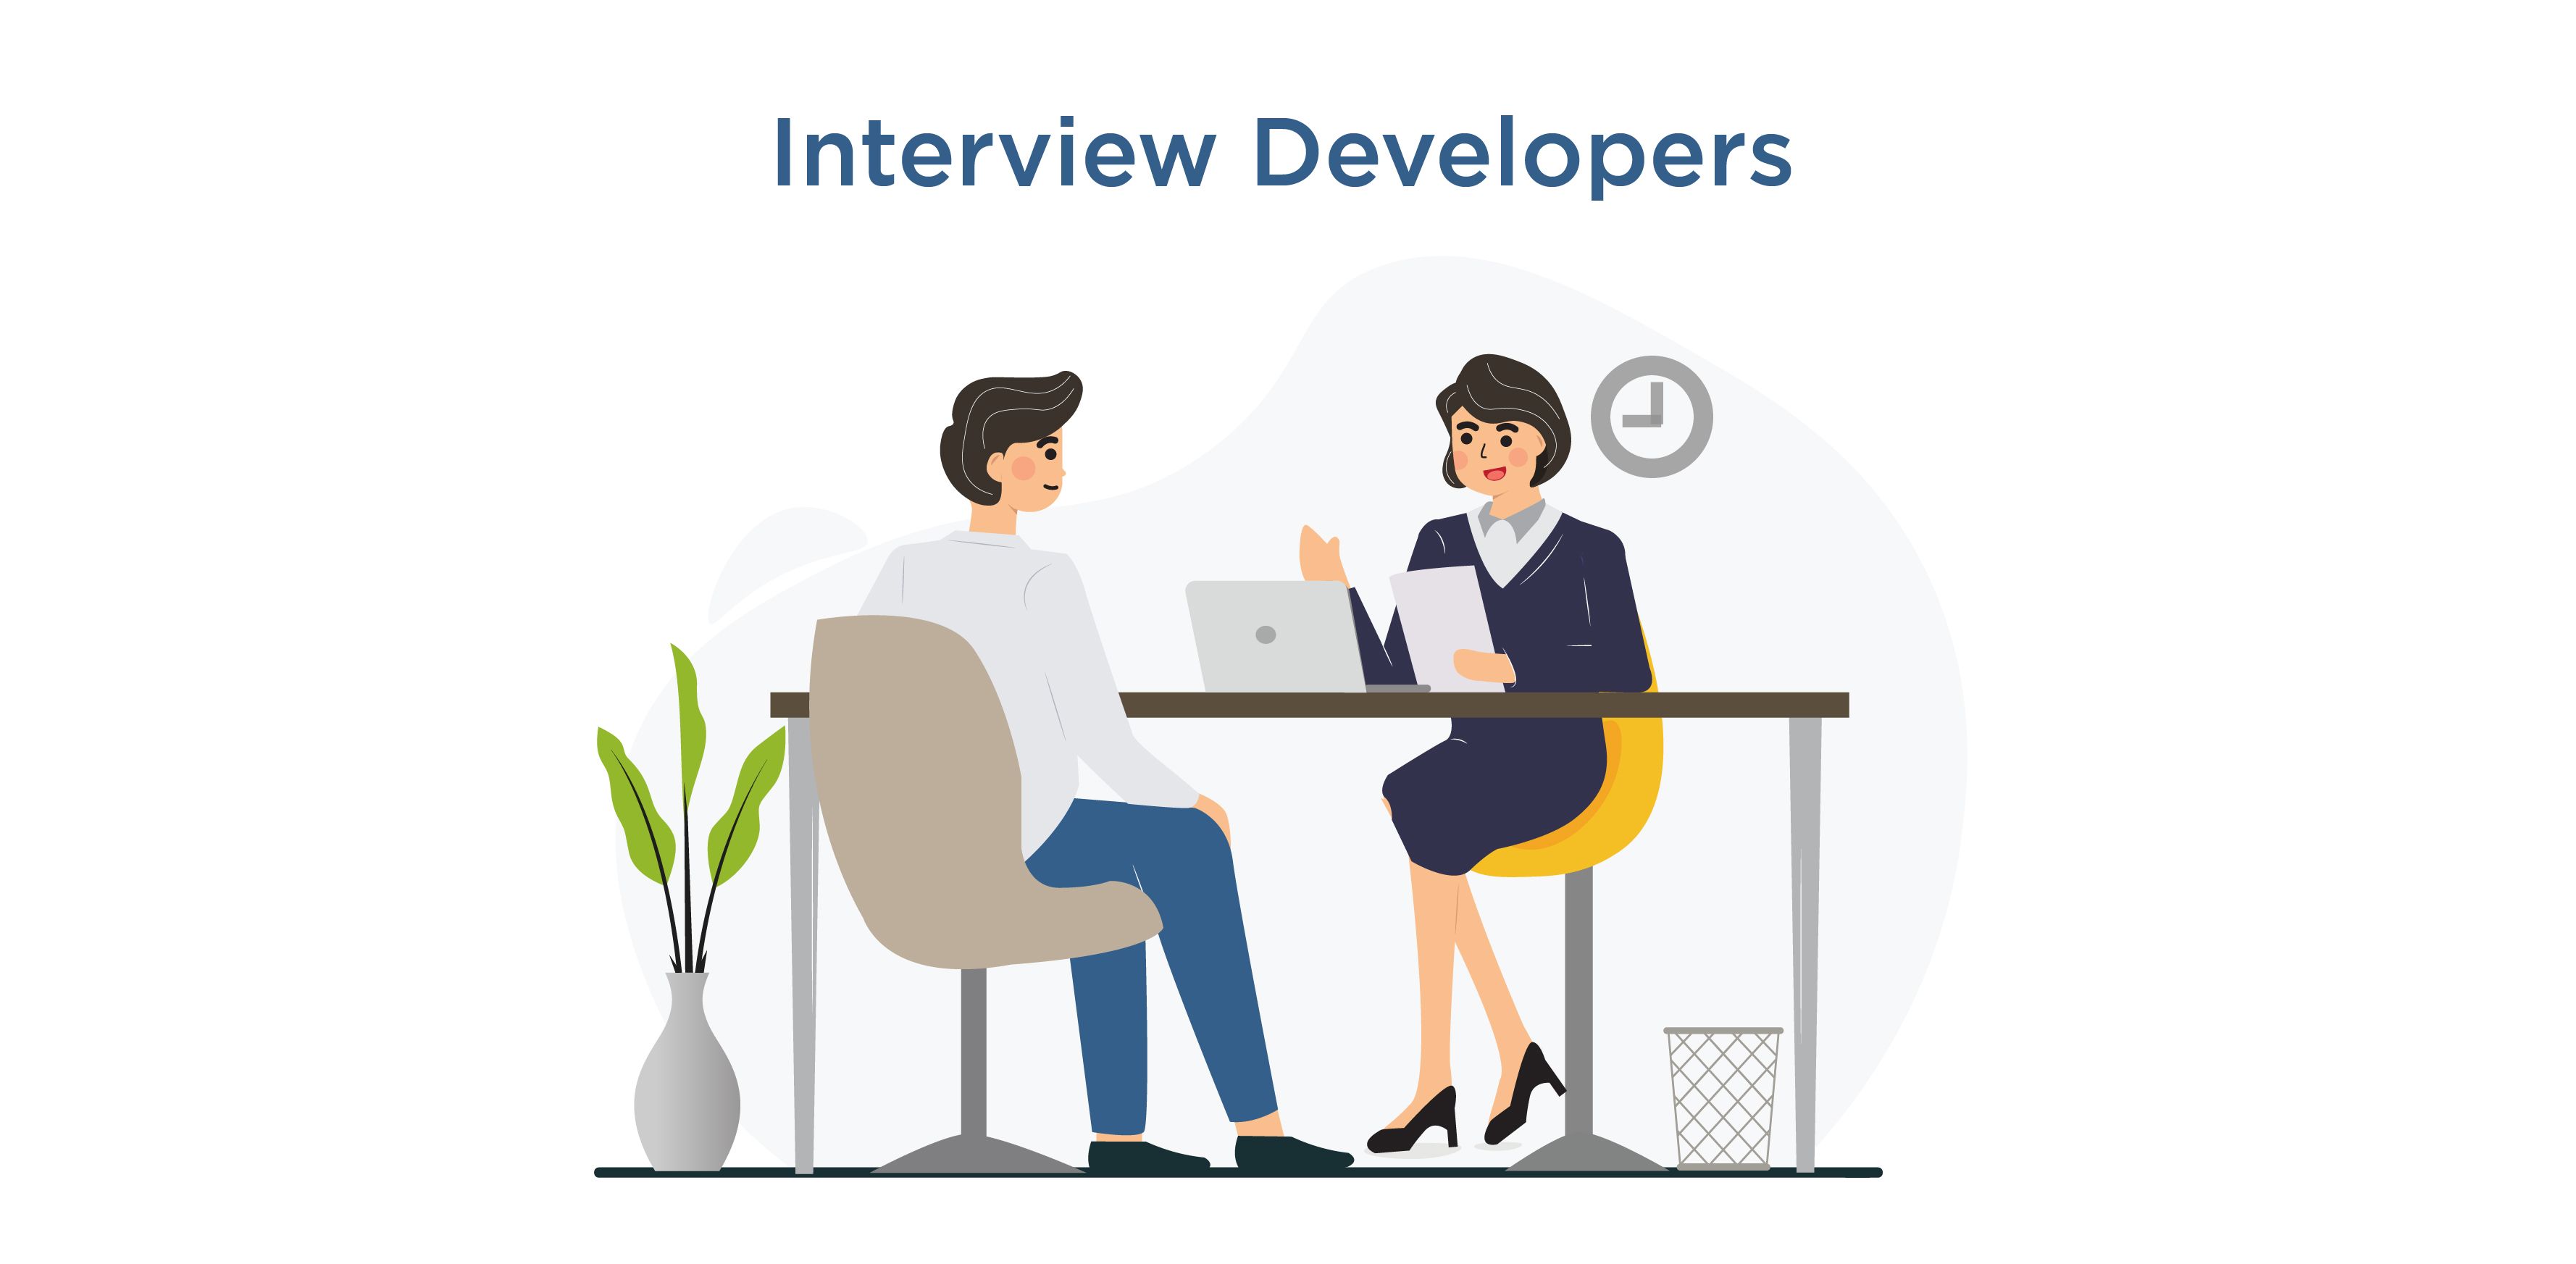 Review applications and interview developers